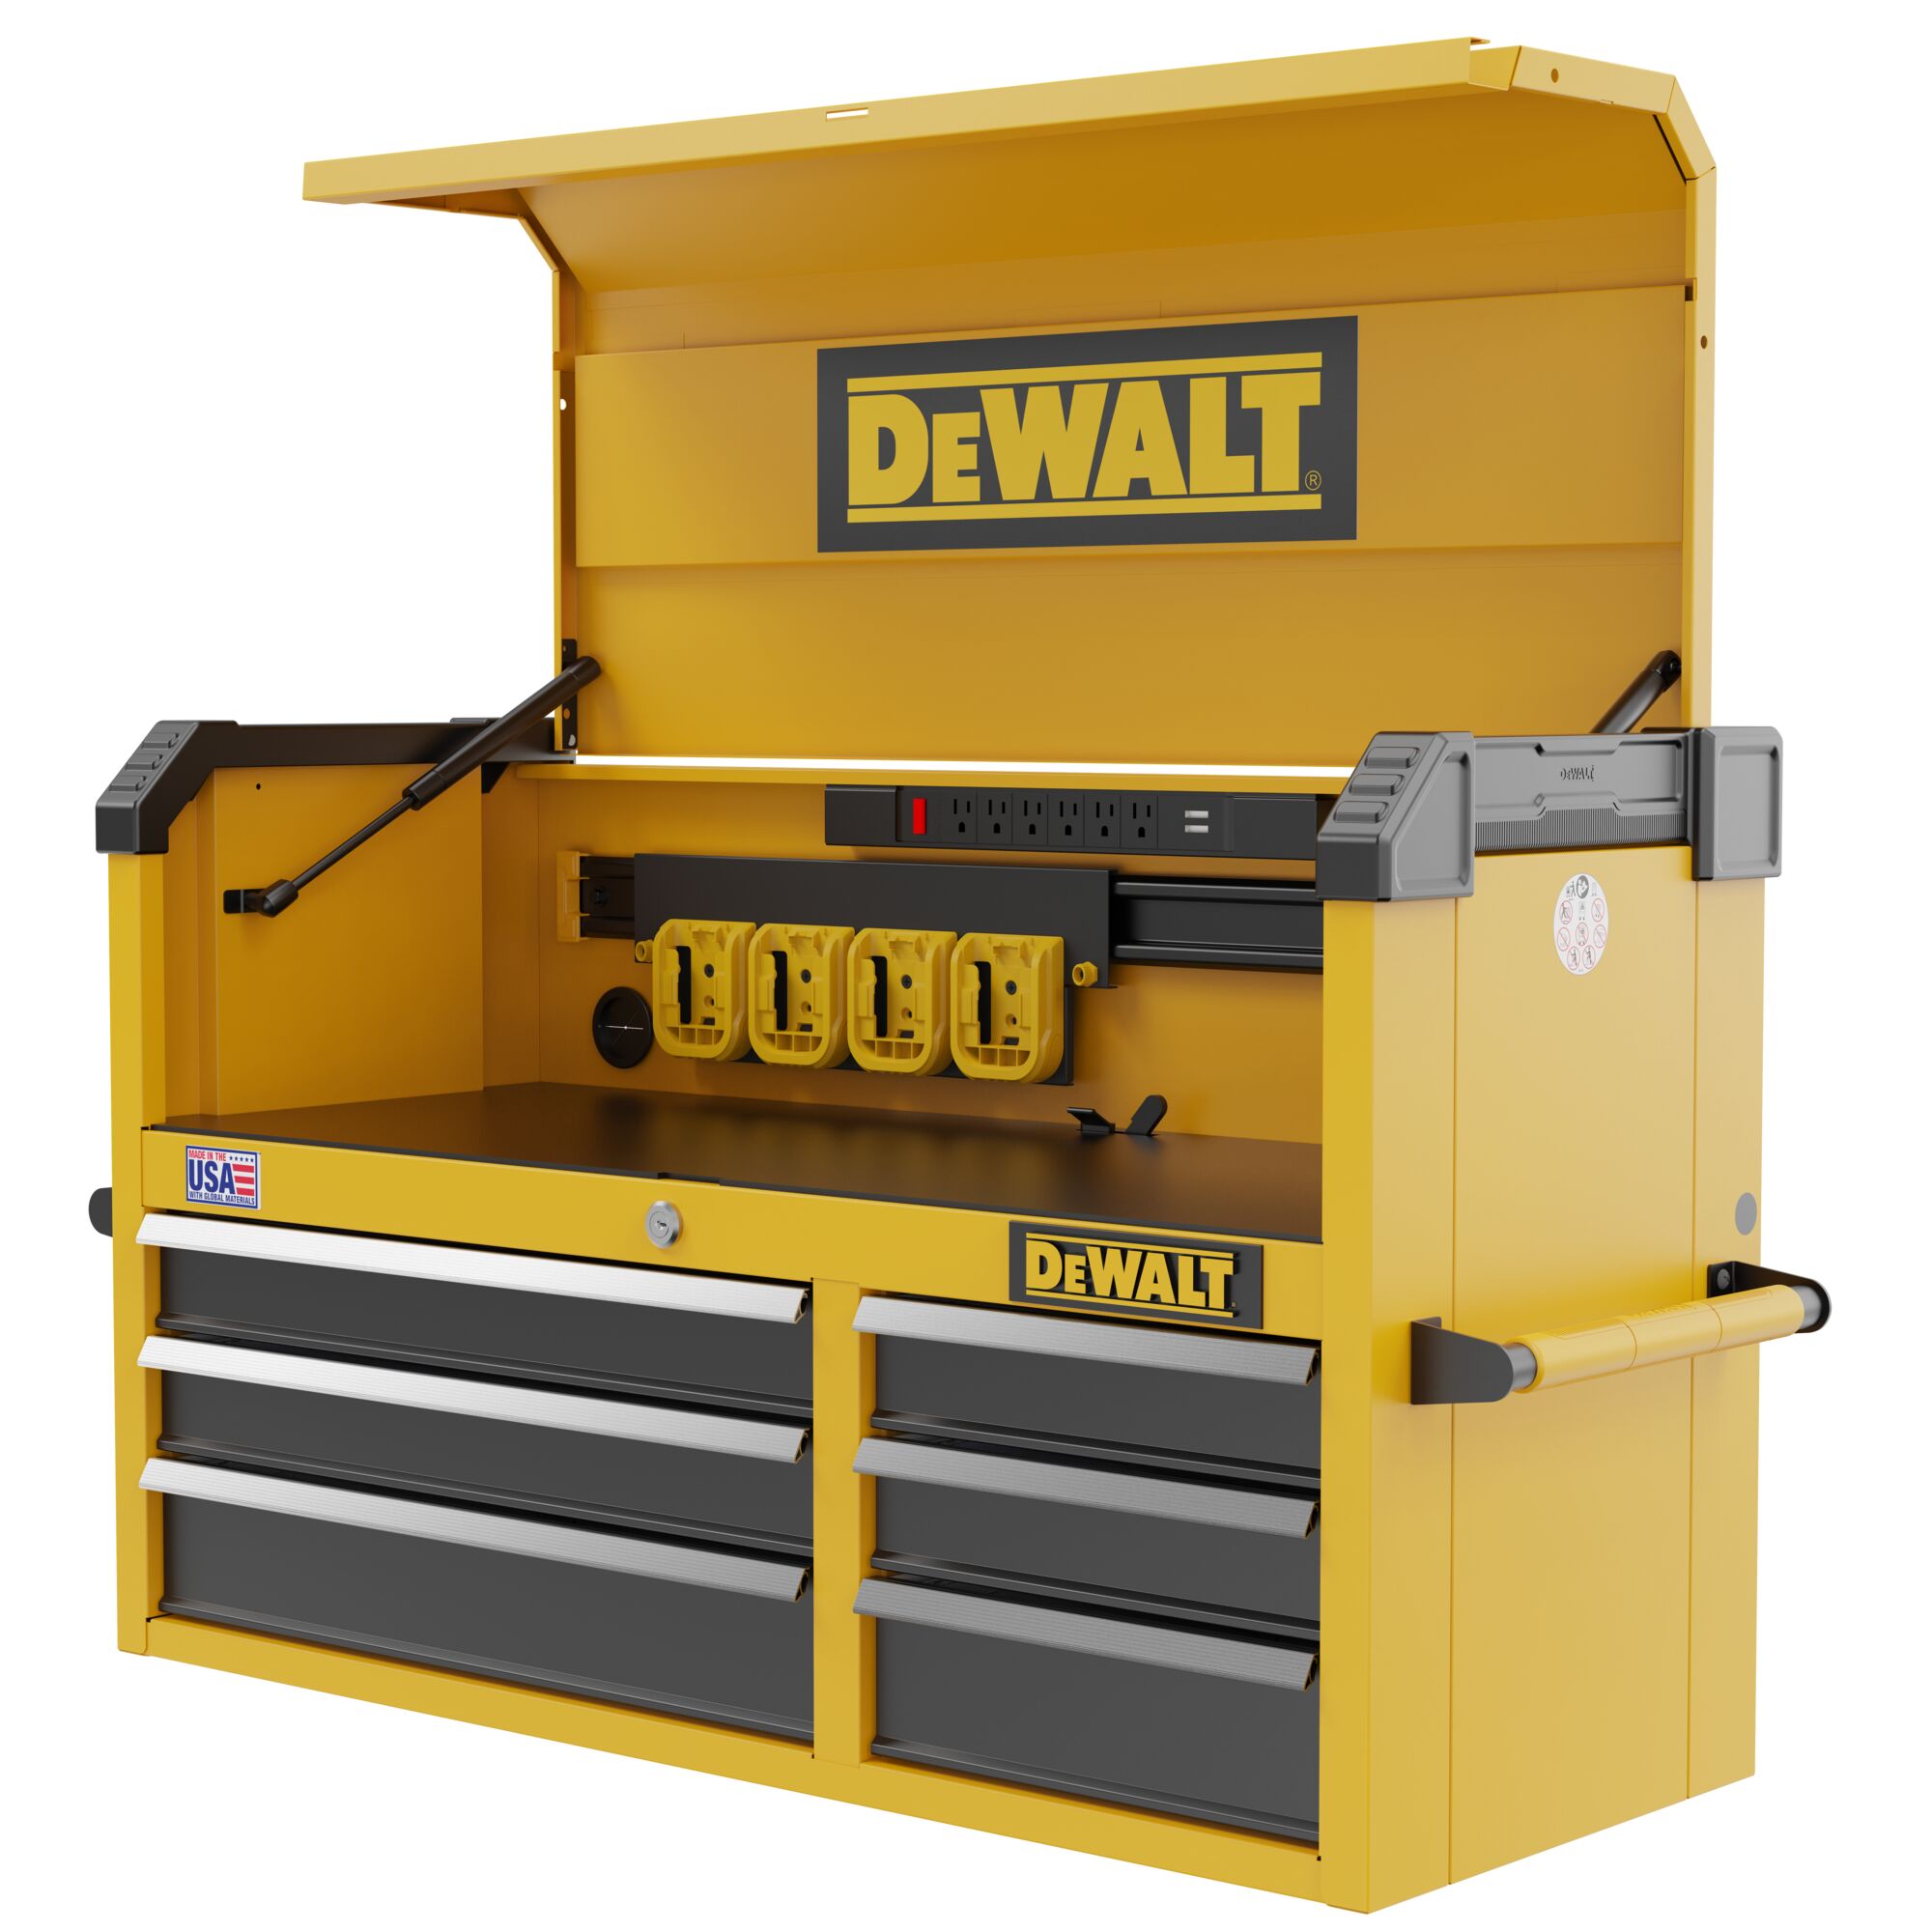 DEWALT 41 in. 6-Drawer Tool Chest - Contractor Cave Tools